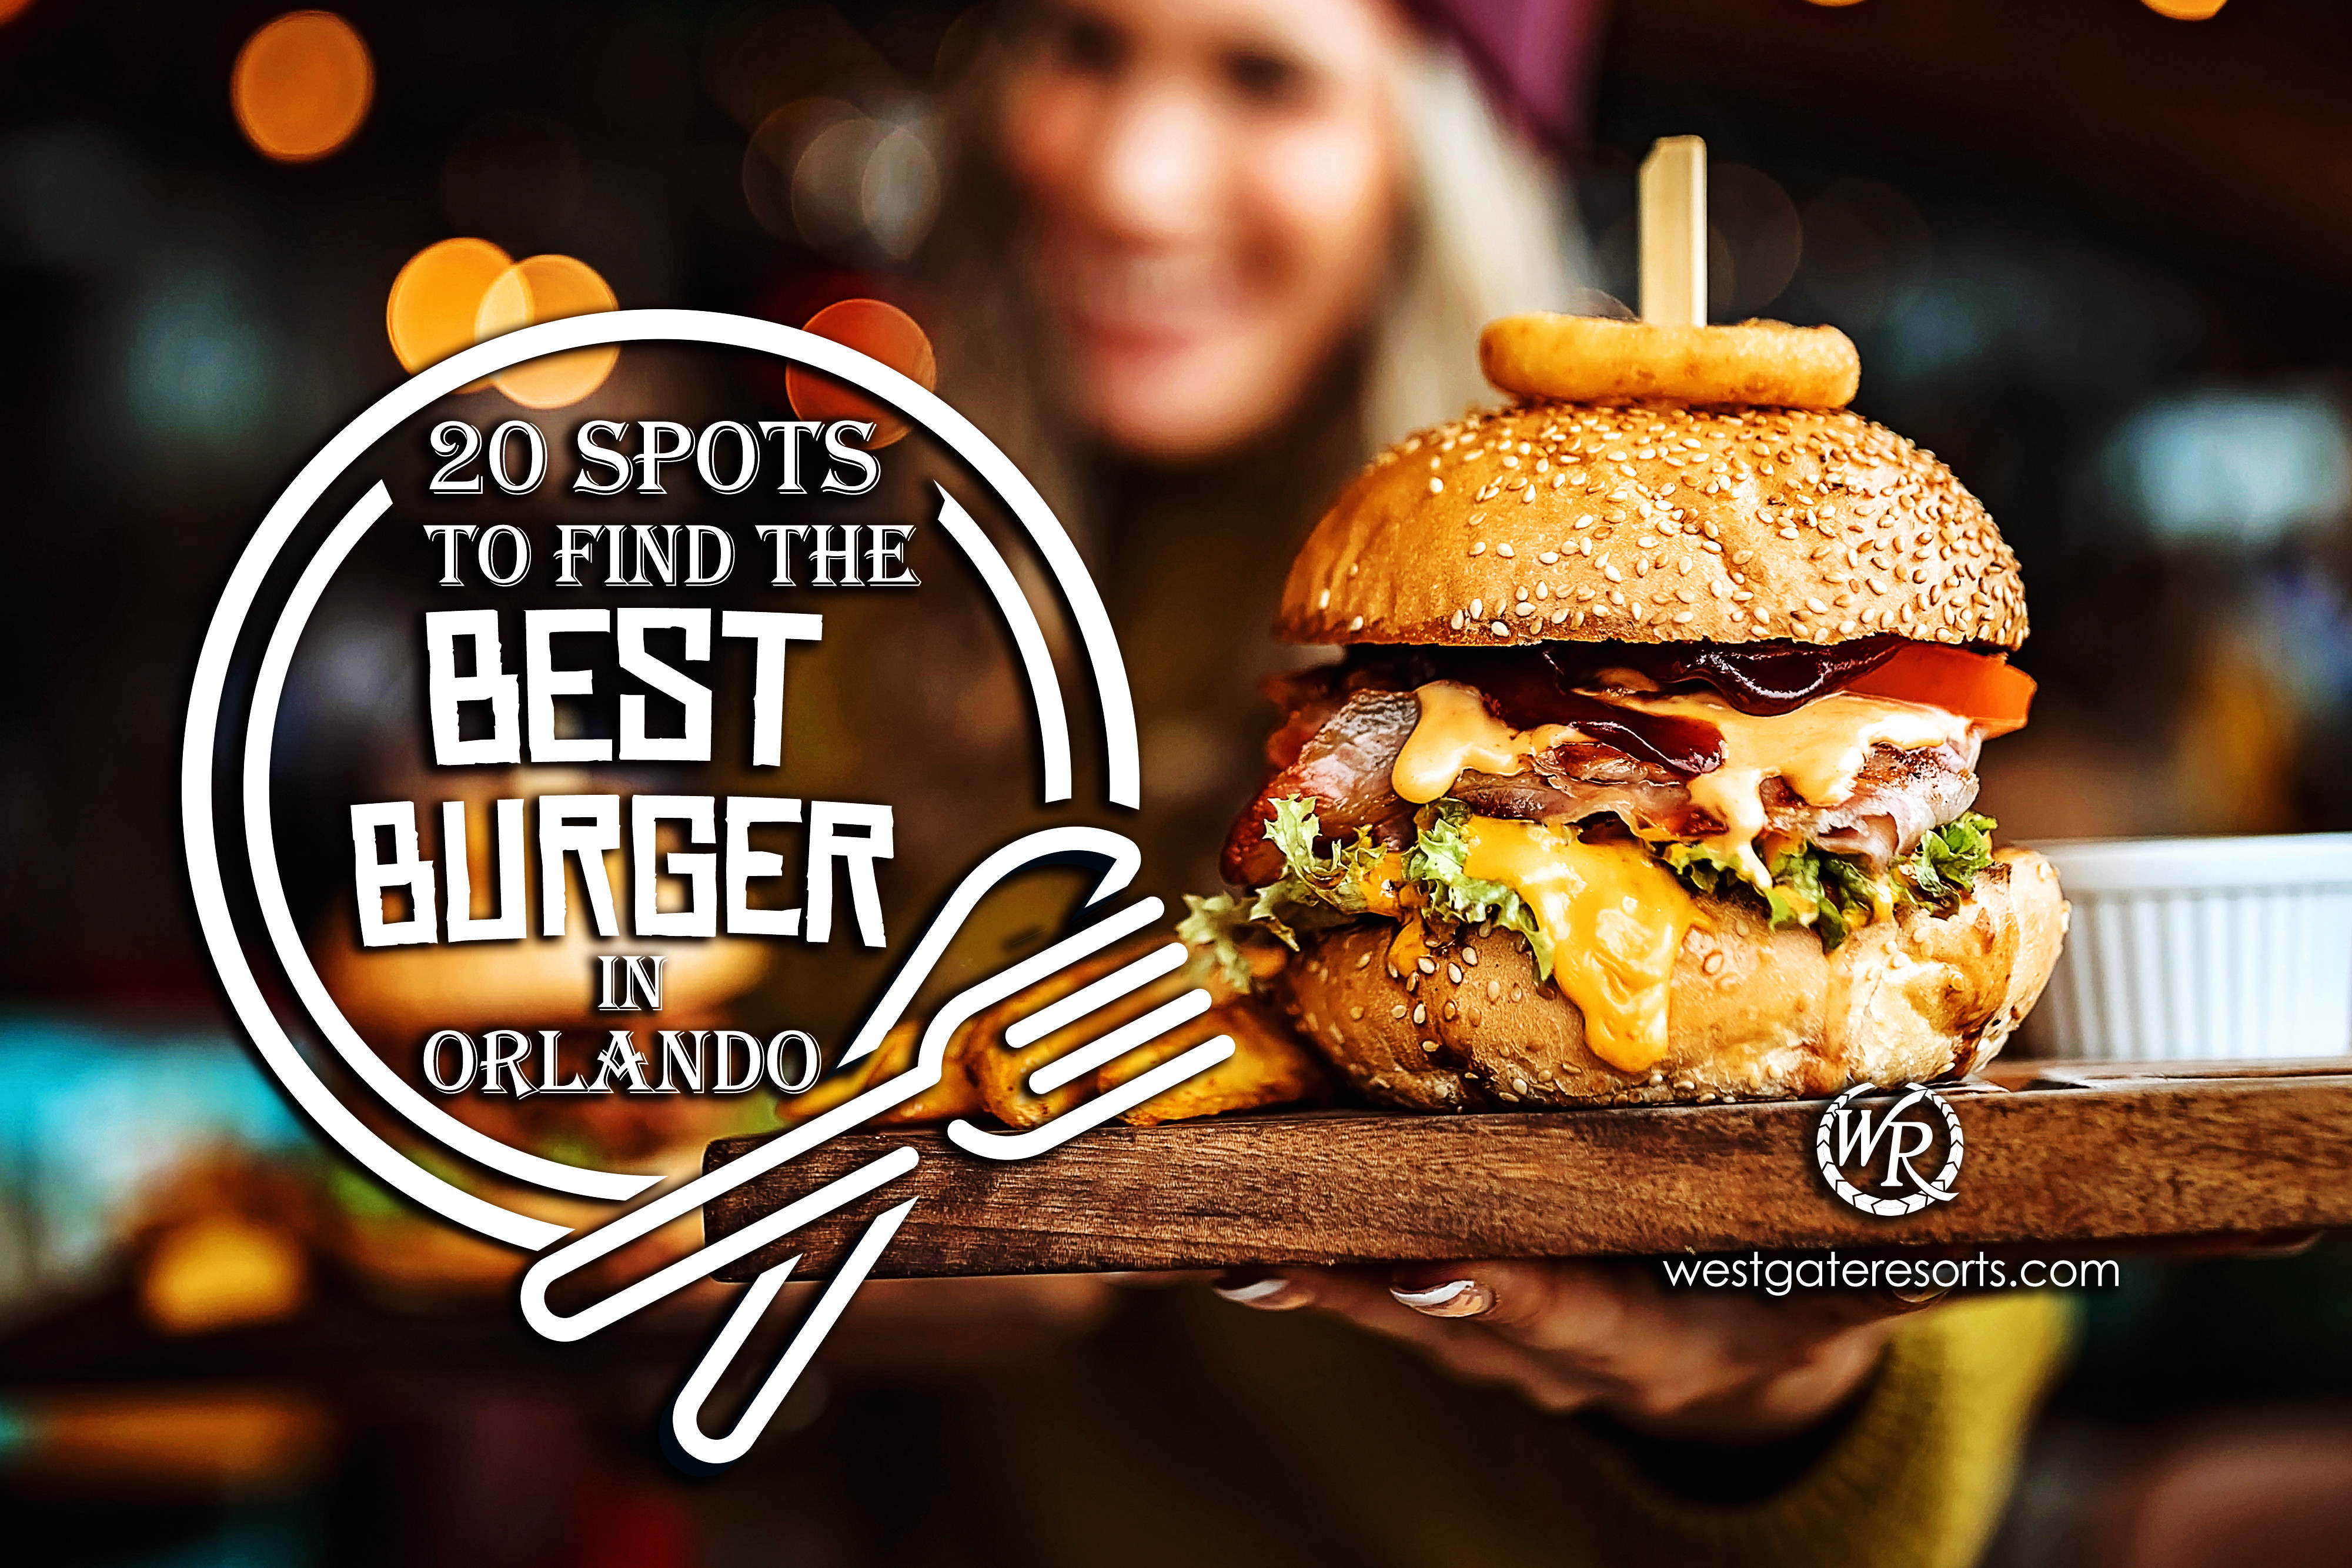 20 Spots to Find the Best Burger in Orlando